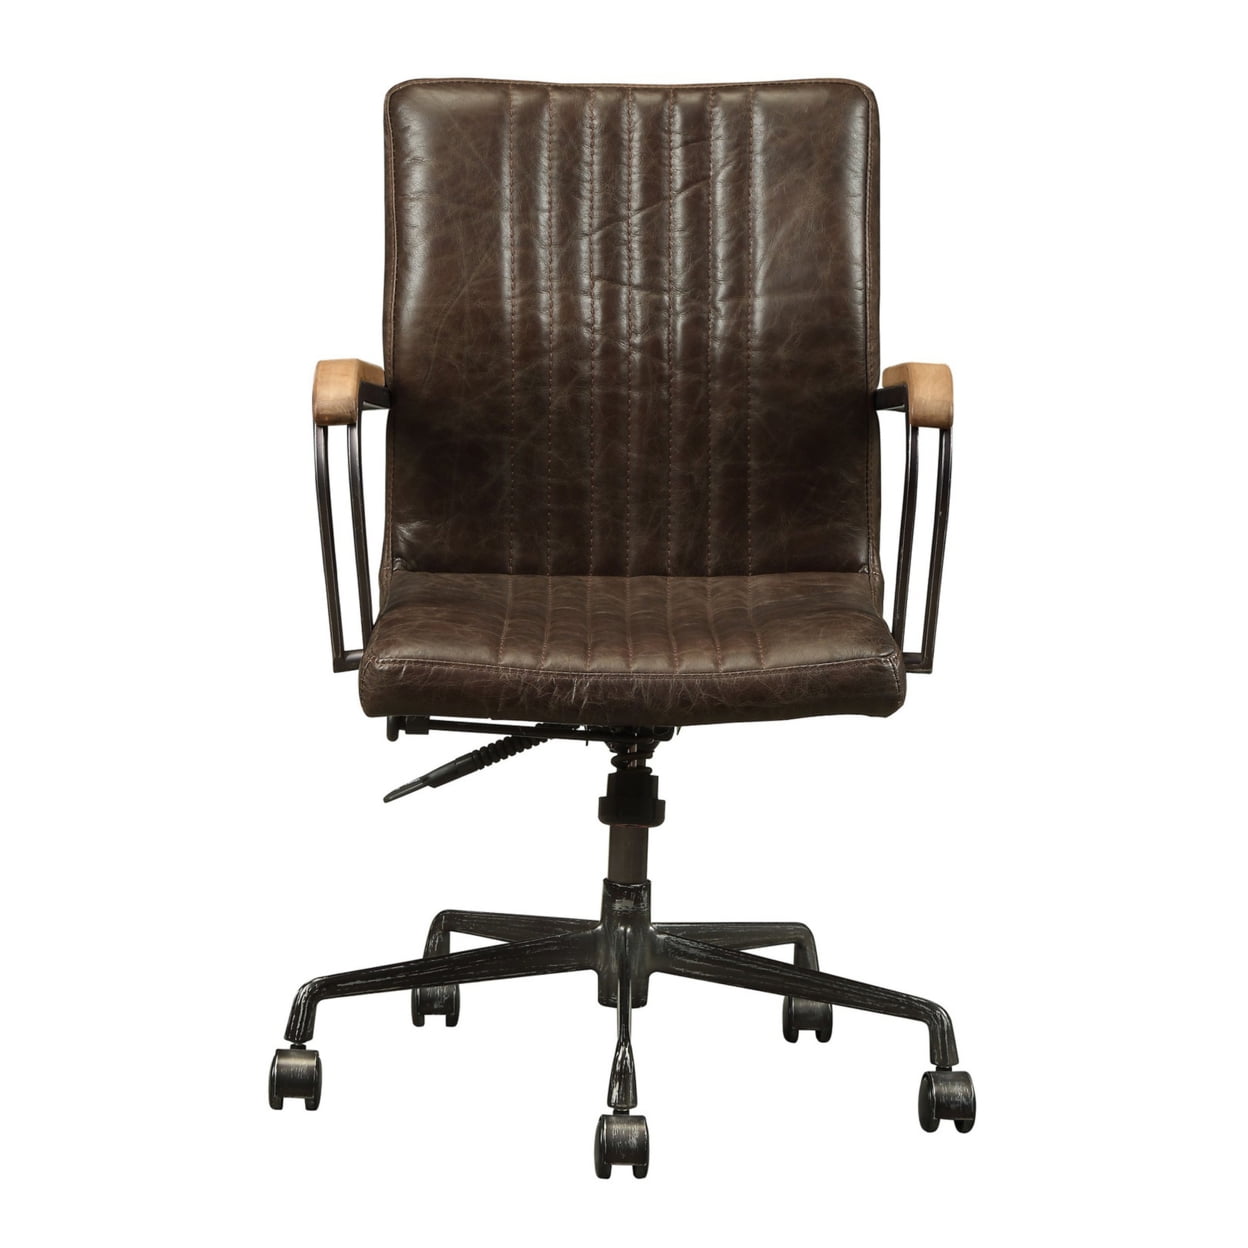 Picture of ACME 92028 Joslin Executive Office Chair - Distress Chocolate Top Grain Leather - 35 x 22 x 26 in.